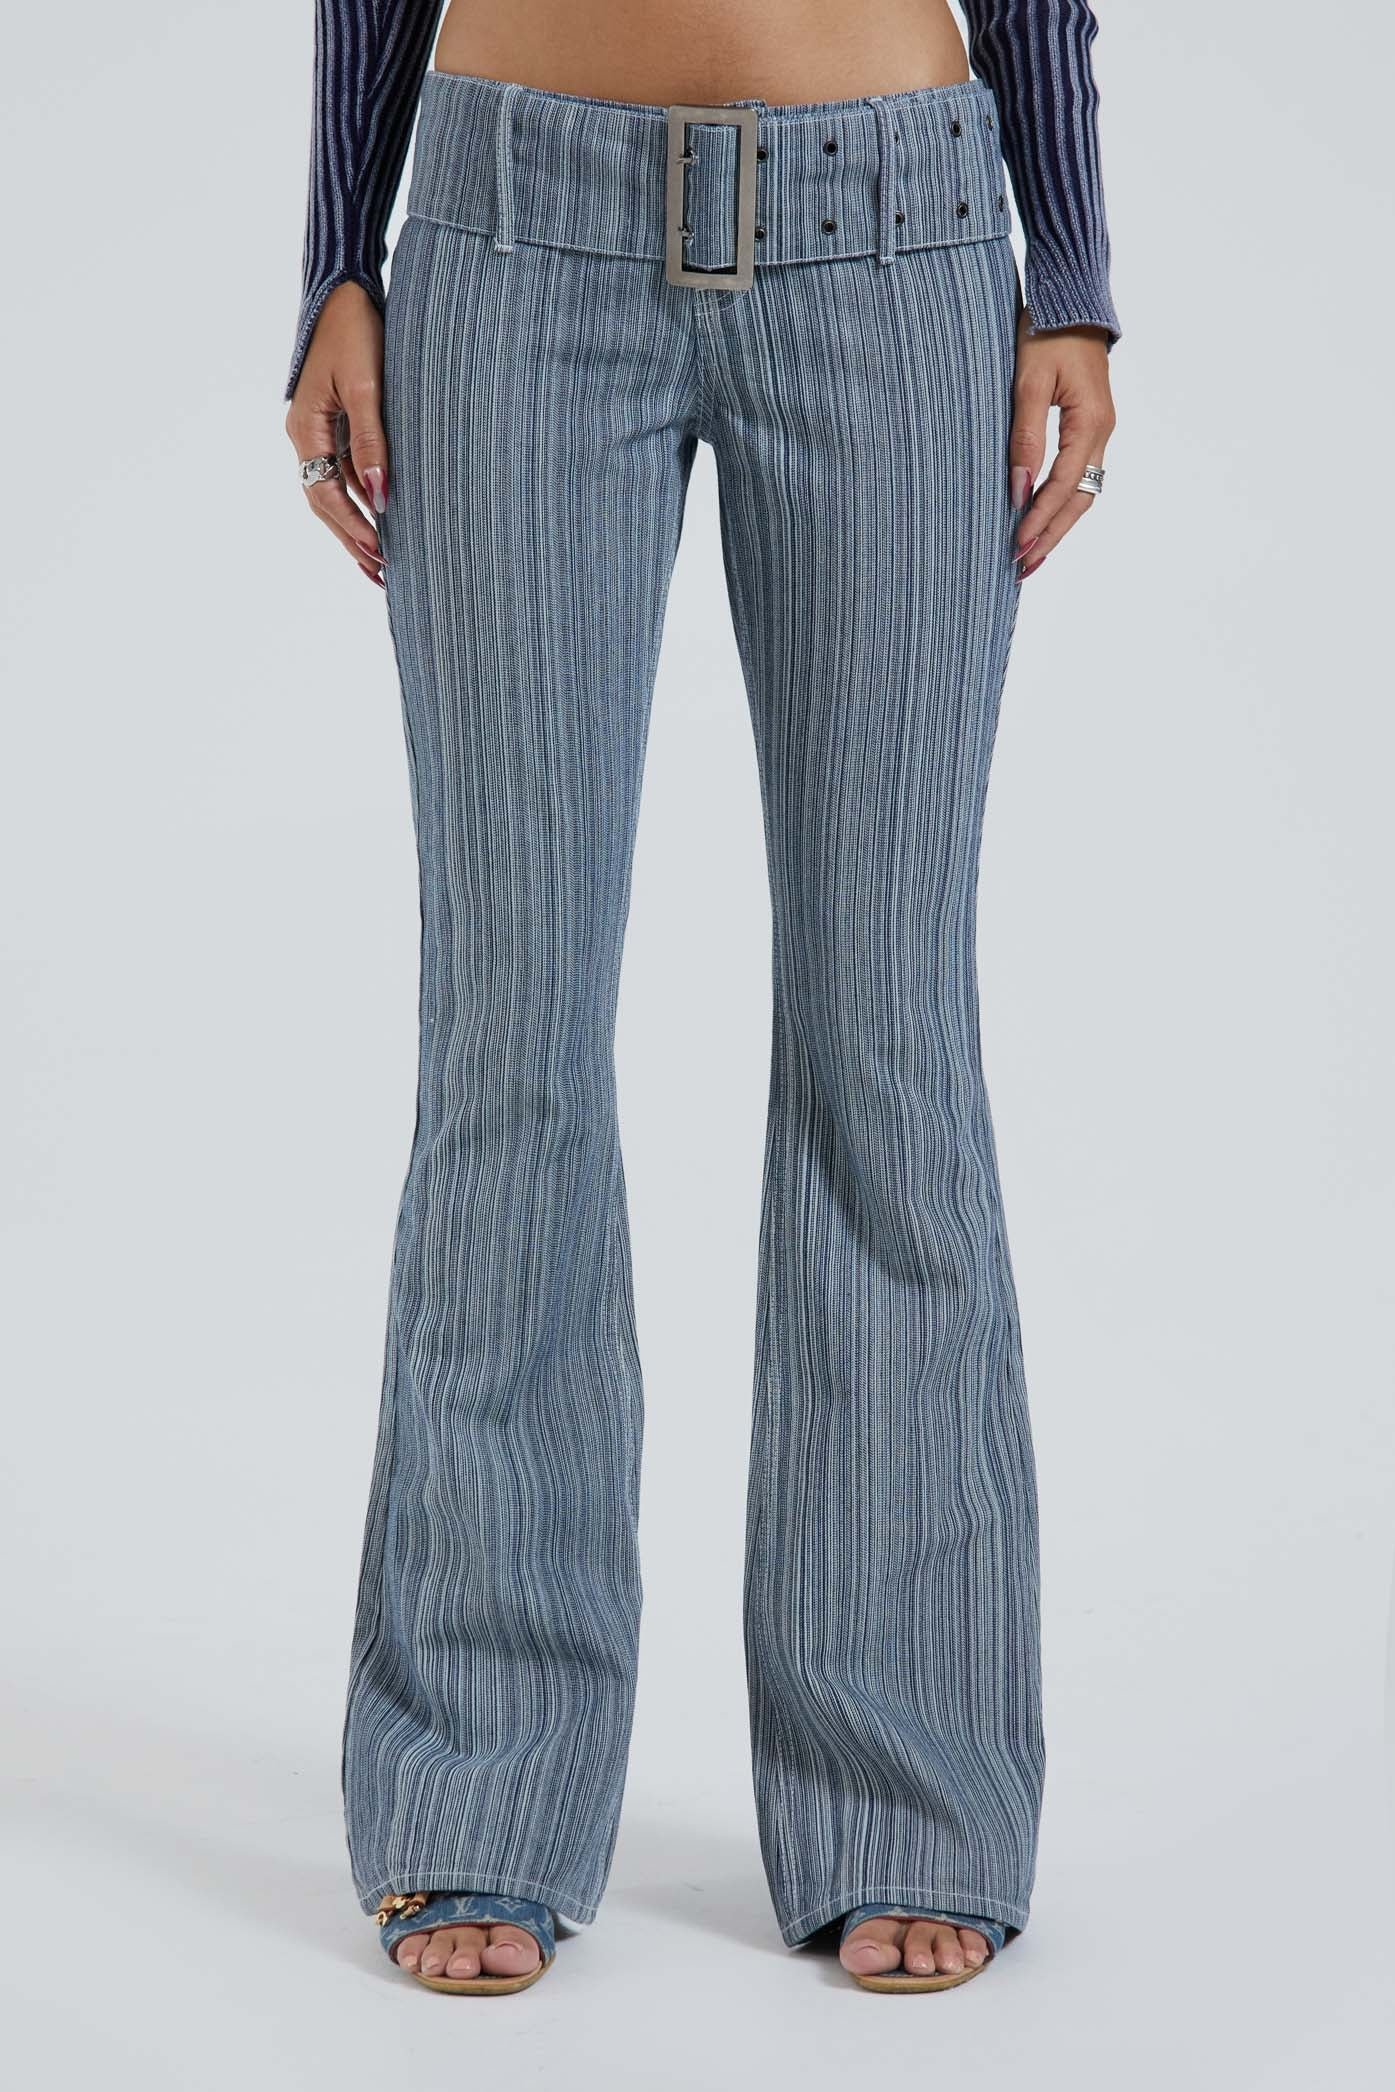 Hickory Stripe Low Rise Belt Detail 00's Style Jeans | Jaded London